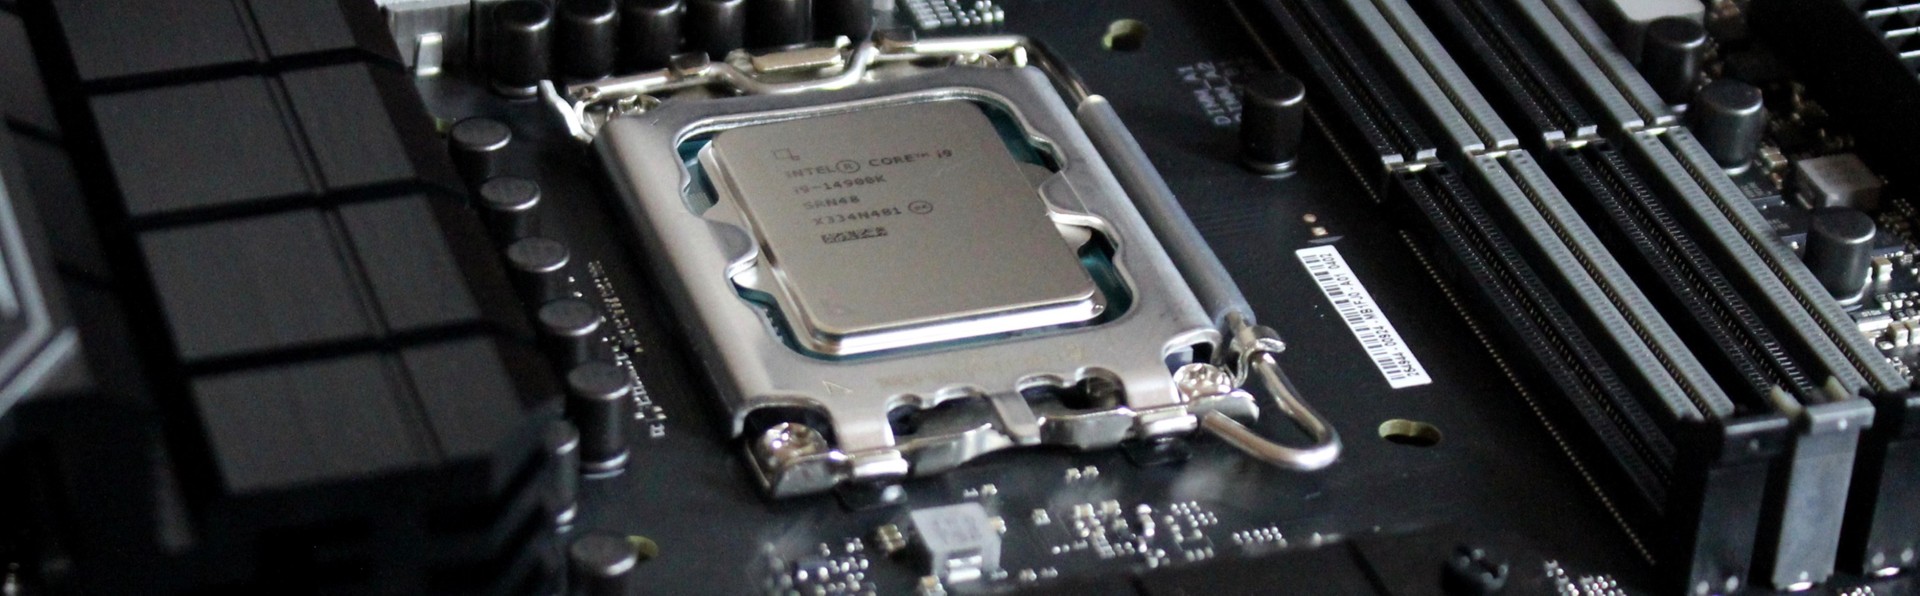 Intel Core i9-14900KF overclocked to 8GHz hits over 1300 FPS in CS2